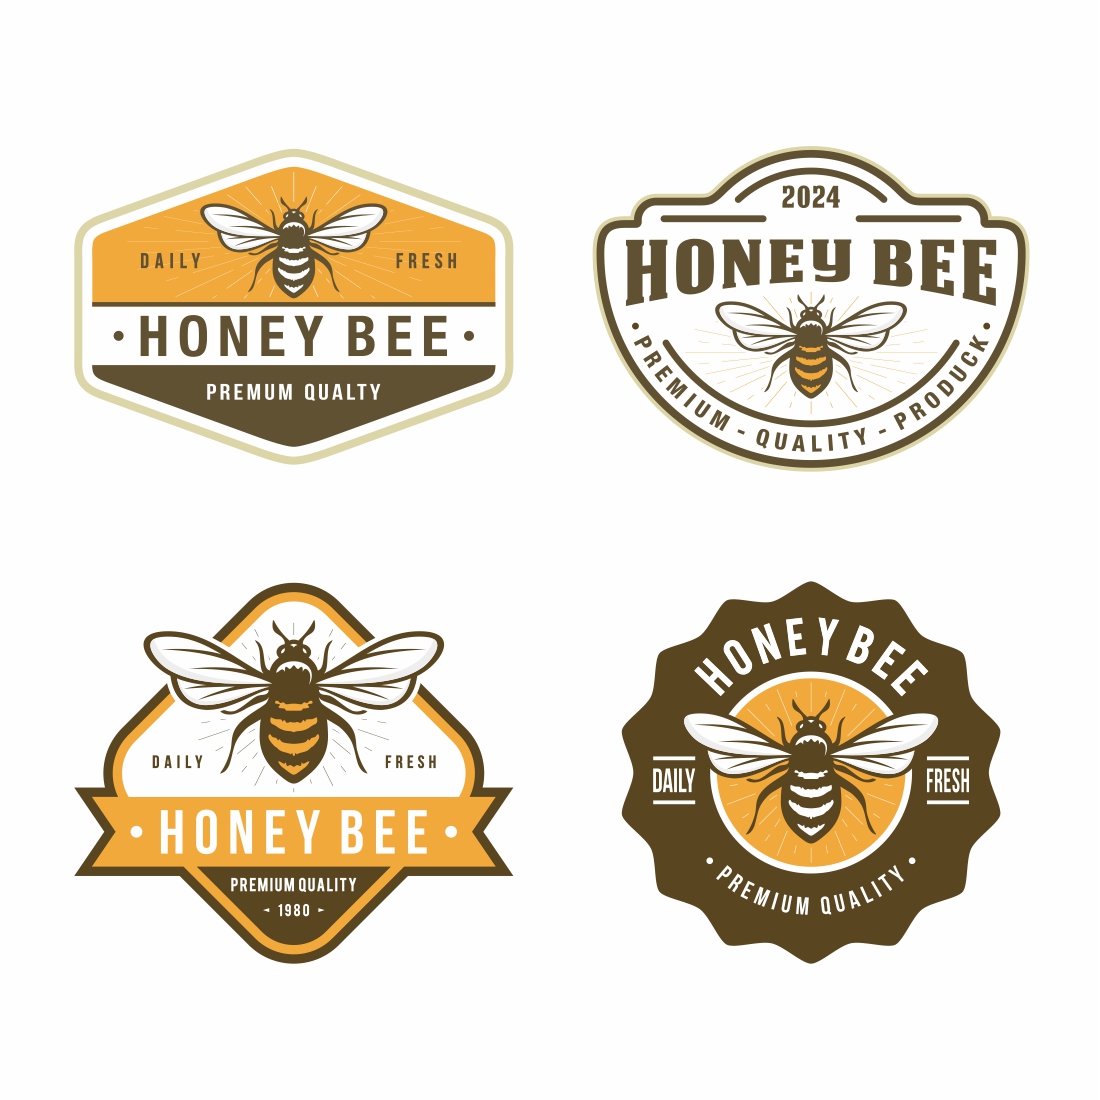 Fresh Honey Bee logo design collection - only 9$ cover image.